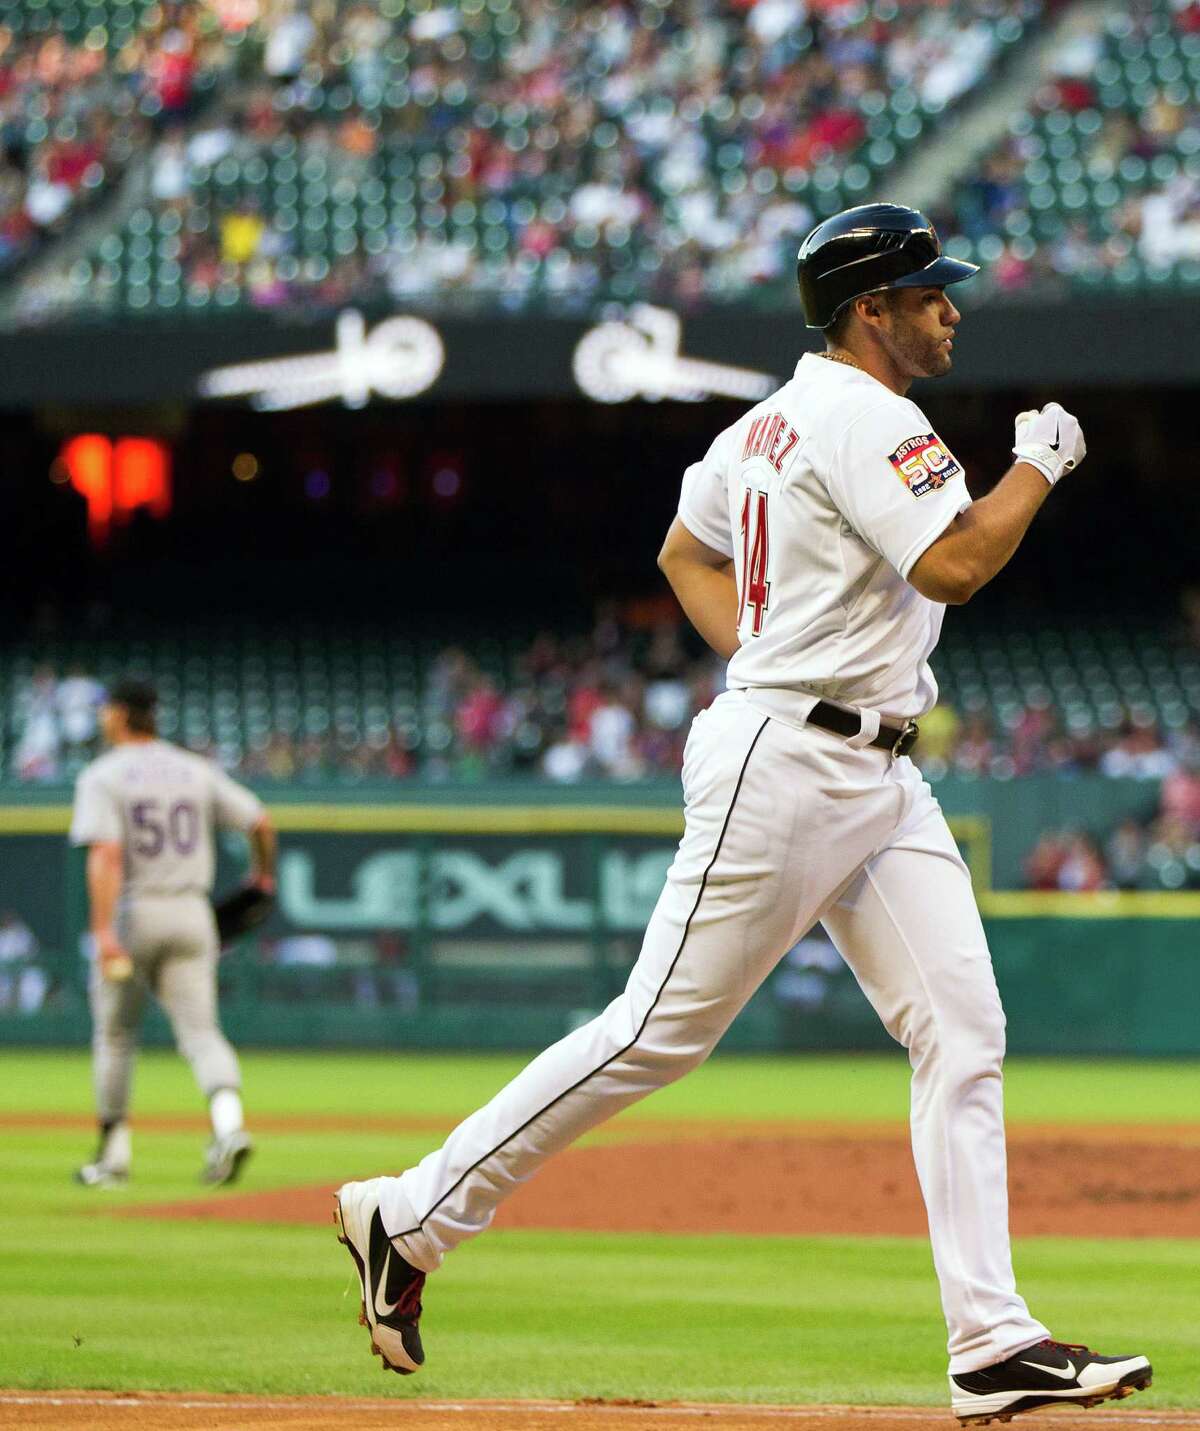 The Astros' J.D. Martinez found at least one pitch to his liking during his Saturday plate appearances against Jamie Moyer (50), homering in the fourth.